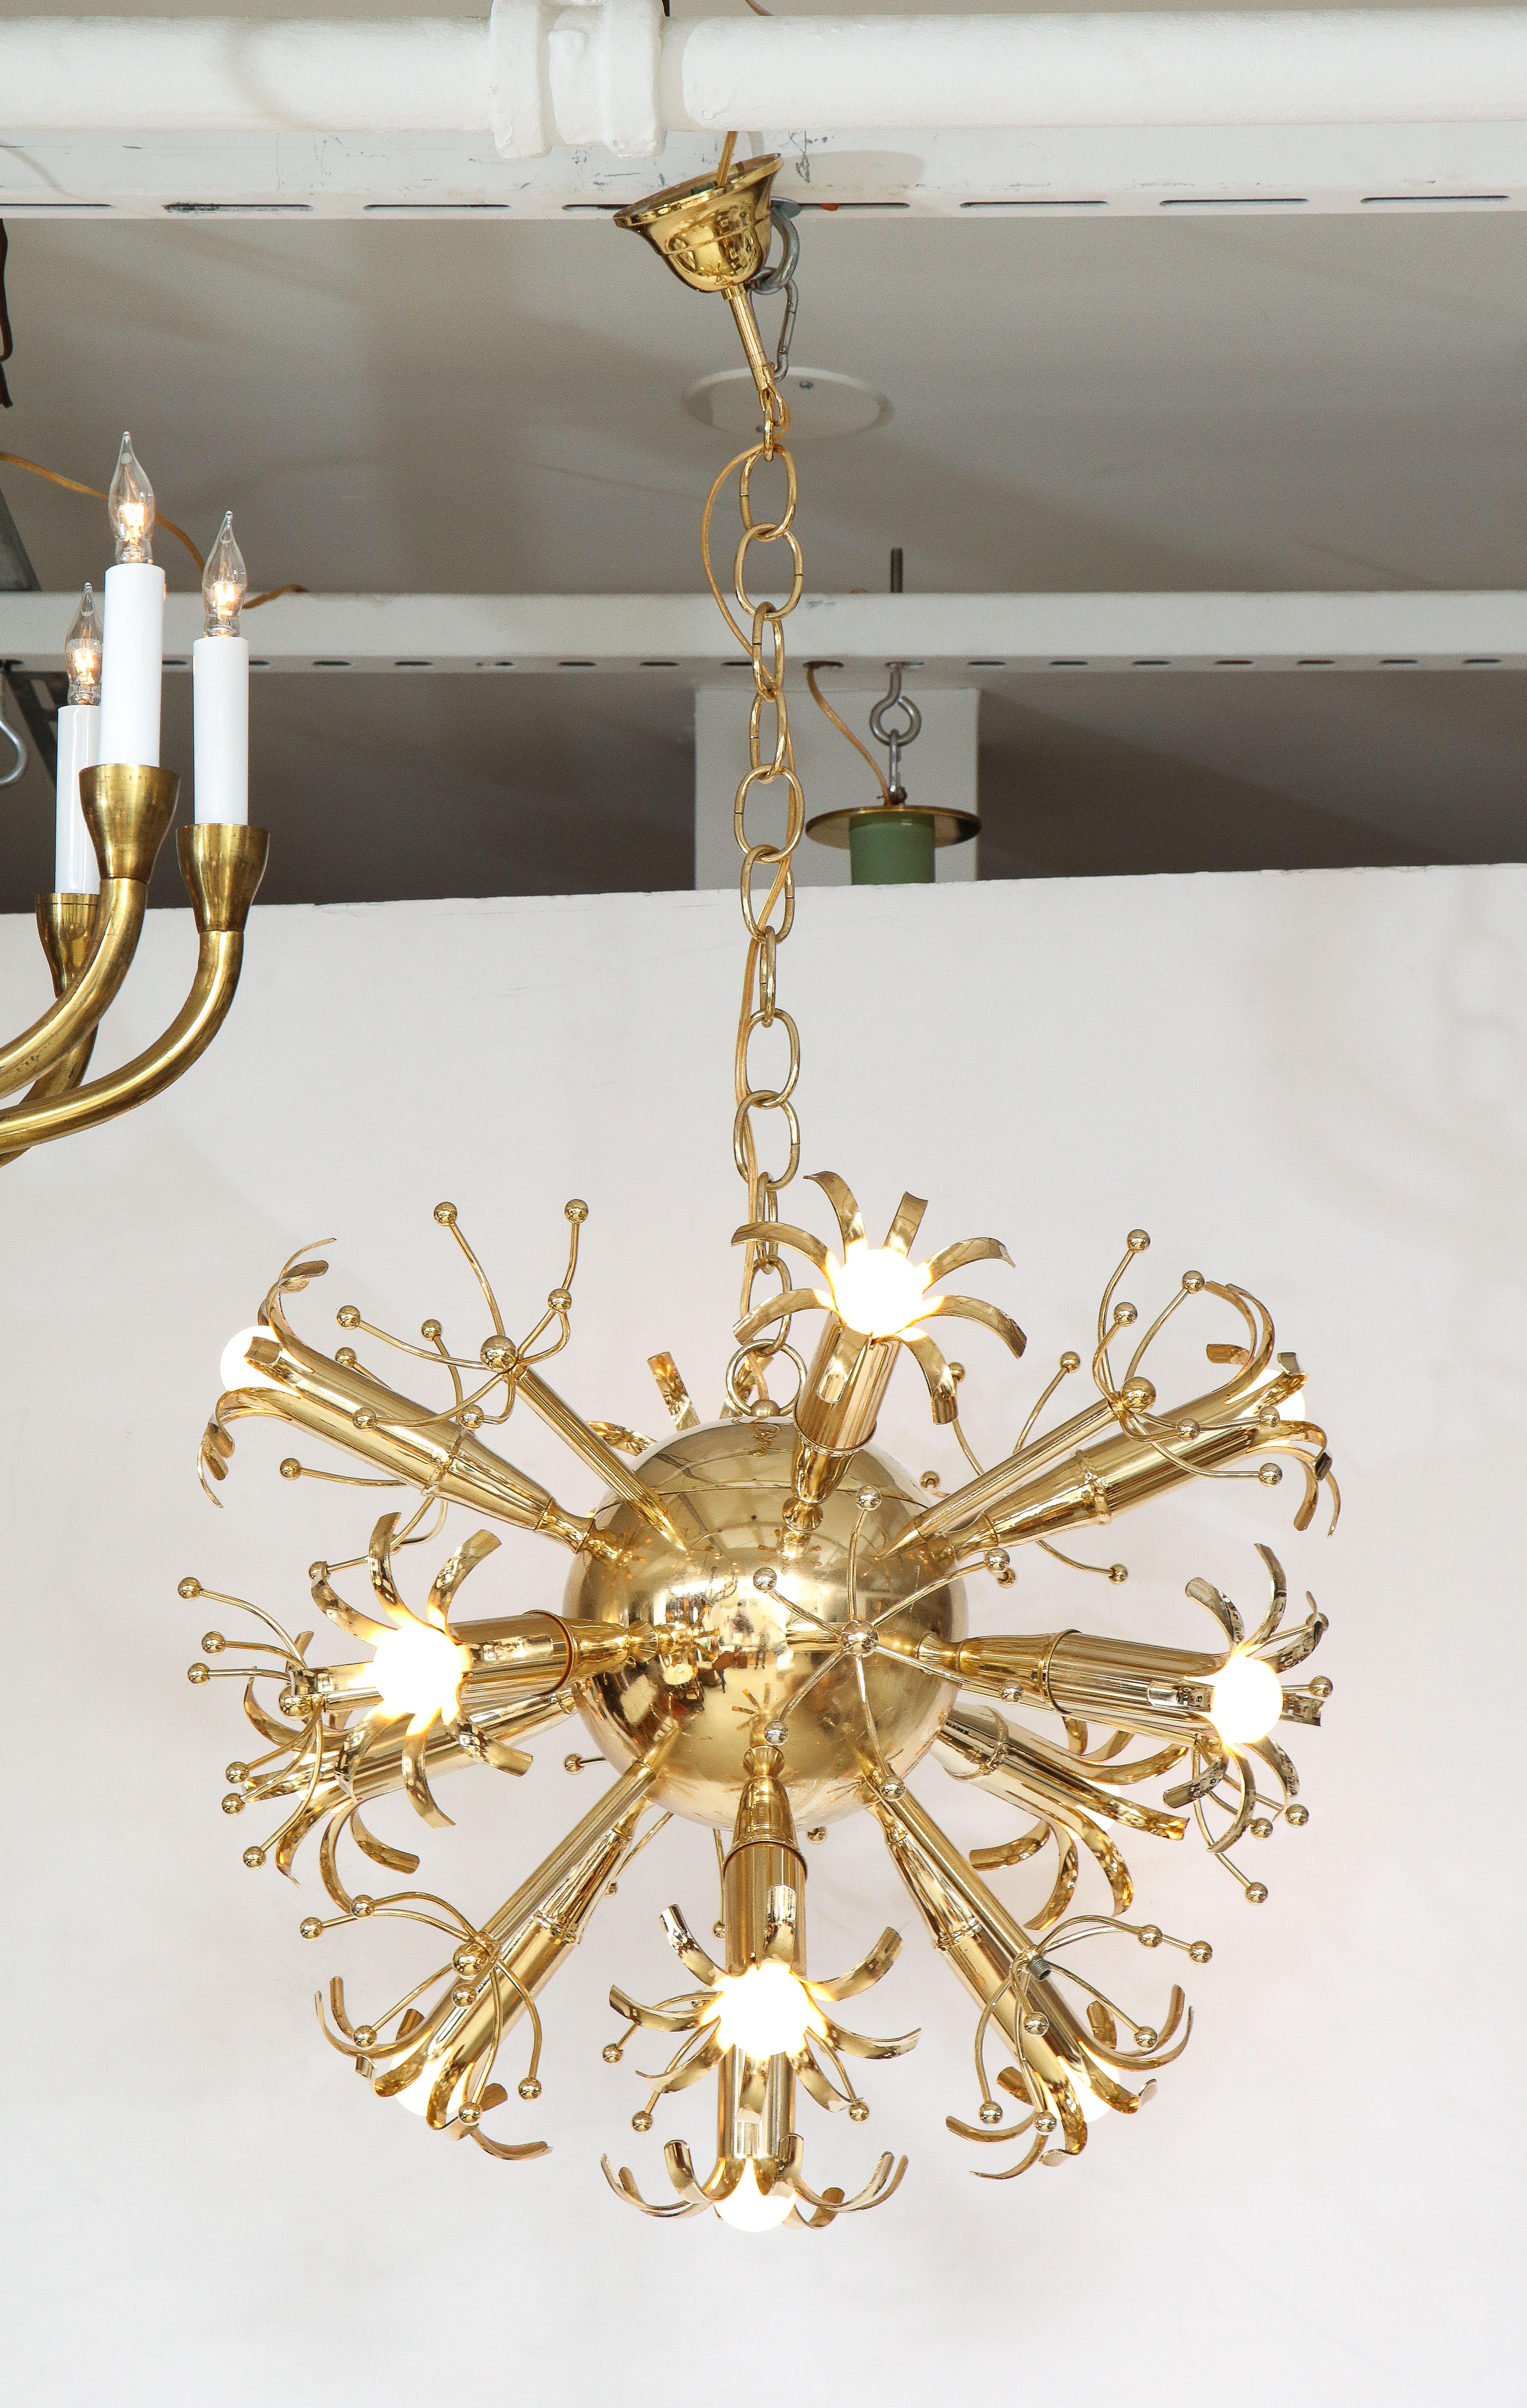 A very uniquely designed brass starburst Sputnik chandelier by Gaetano Sciolari. The dramatic arms emanate from the central brass ball, with its original brass canopy and chain. Newly rewired for USA standards. Height can be adjusted to any desired